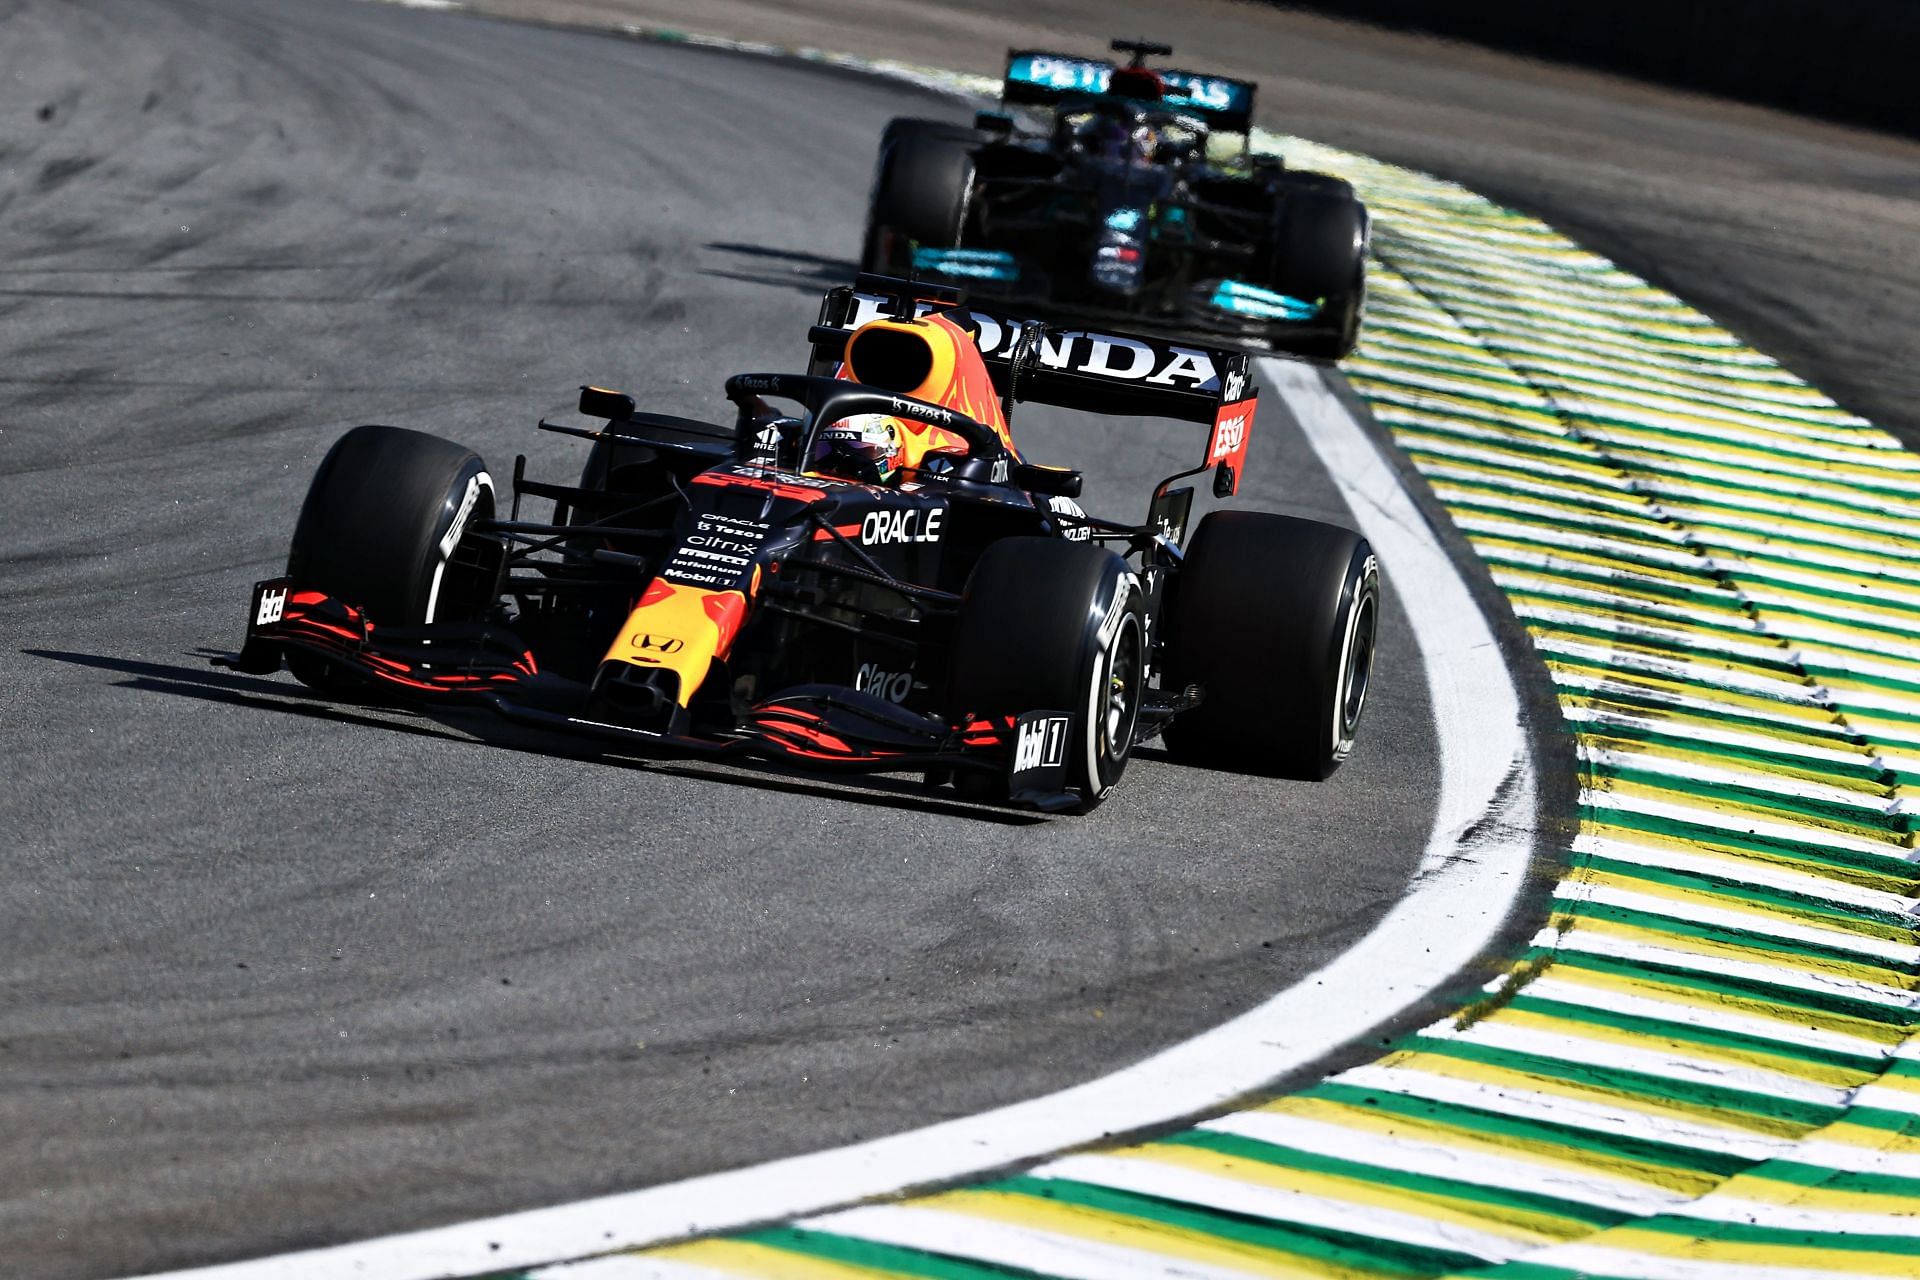 Max Verstappen leads Lewis Hamilton during the F1 Grand Prix of Brazil at Autodromo Jose Carlos Pace in Sao Paulo, Brazil. (Photo by Buda Mendes/Getty Images)